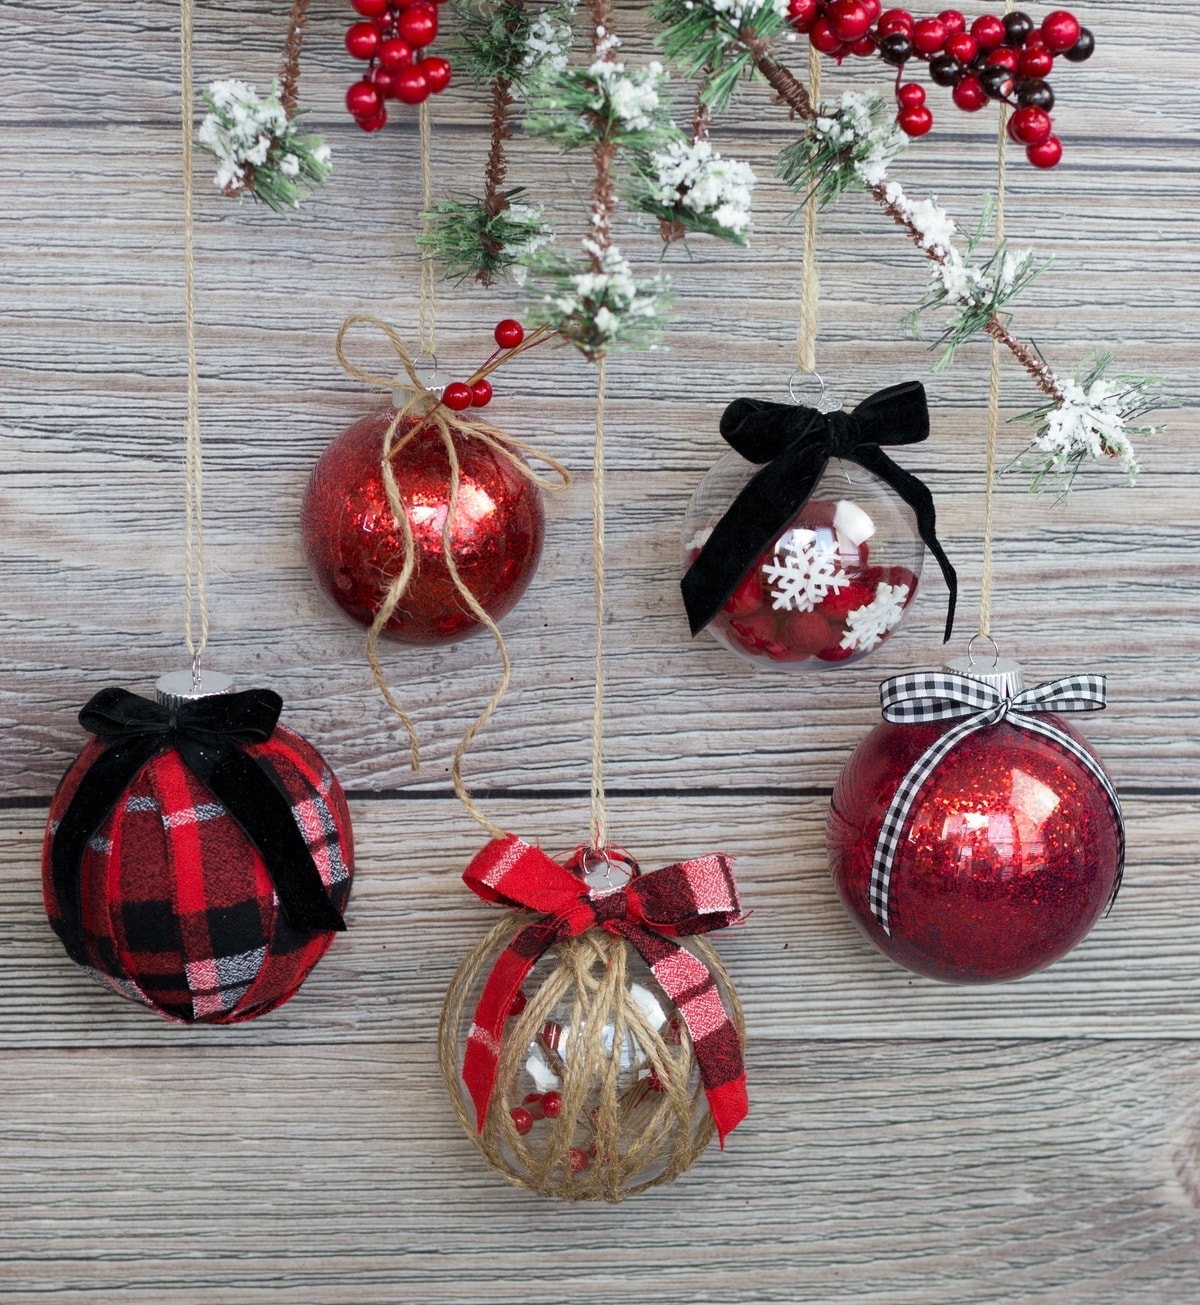 Decorate Clear Plastic Christmas Ornaments DIY Tutorial with Glitter, Fabric, Twine, Felt and Ribbon